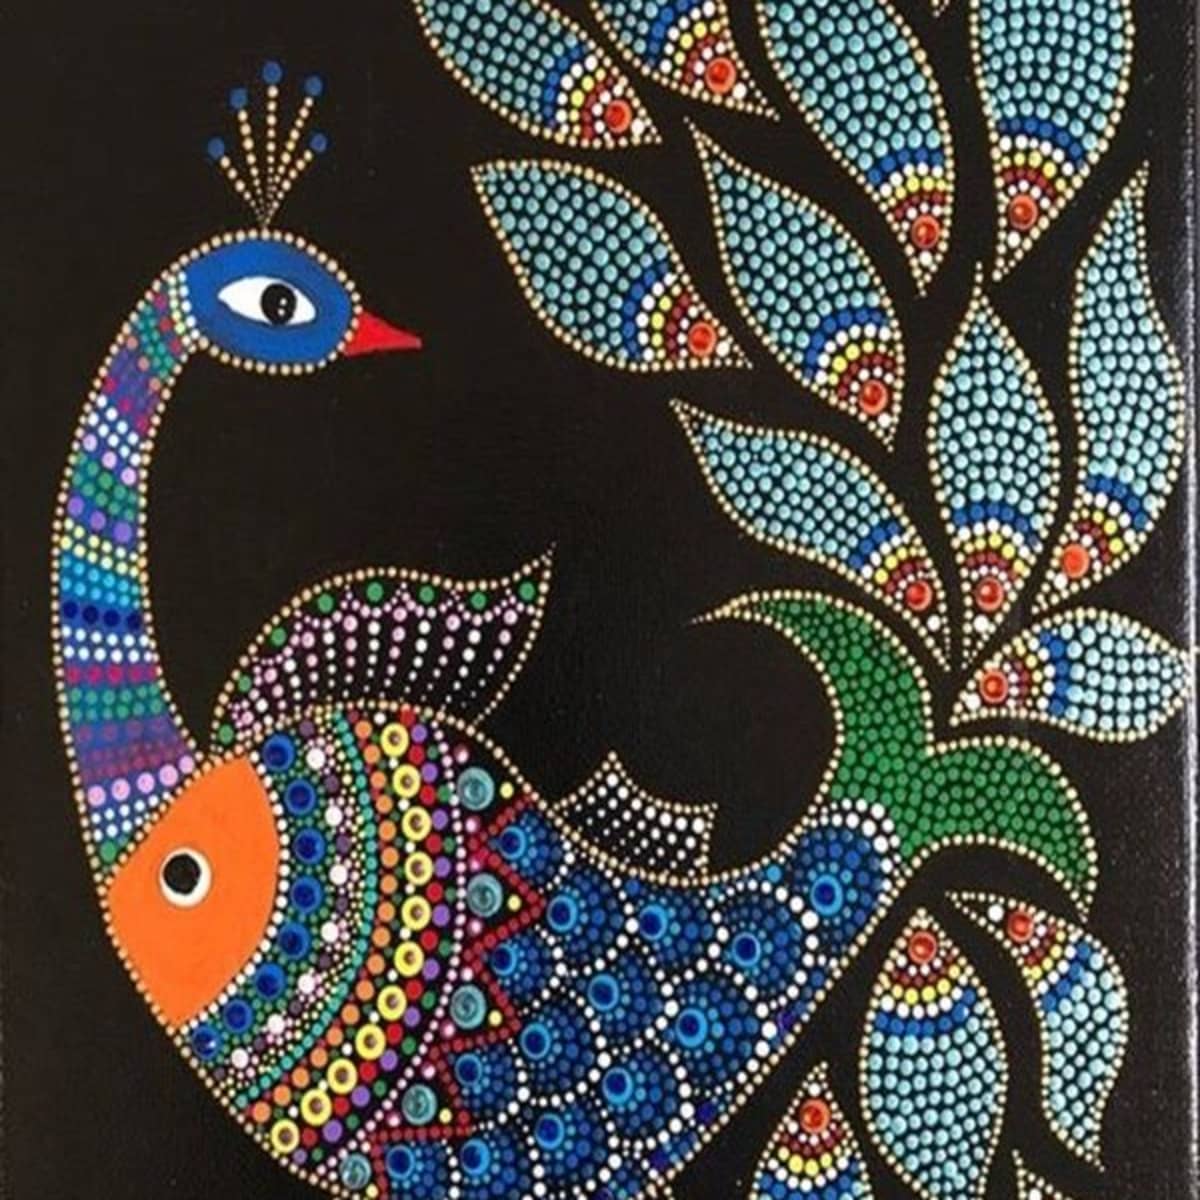 Gond Painting - HubPages